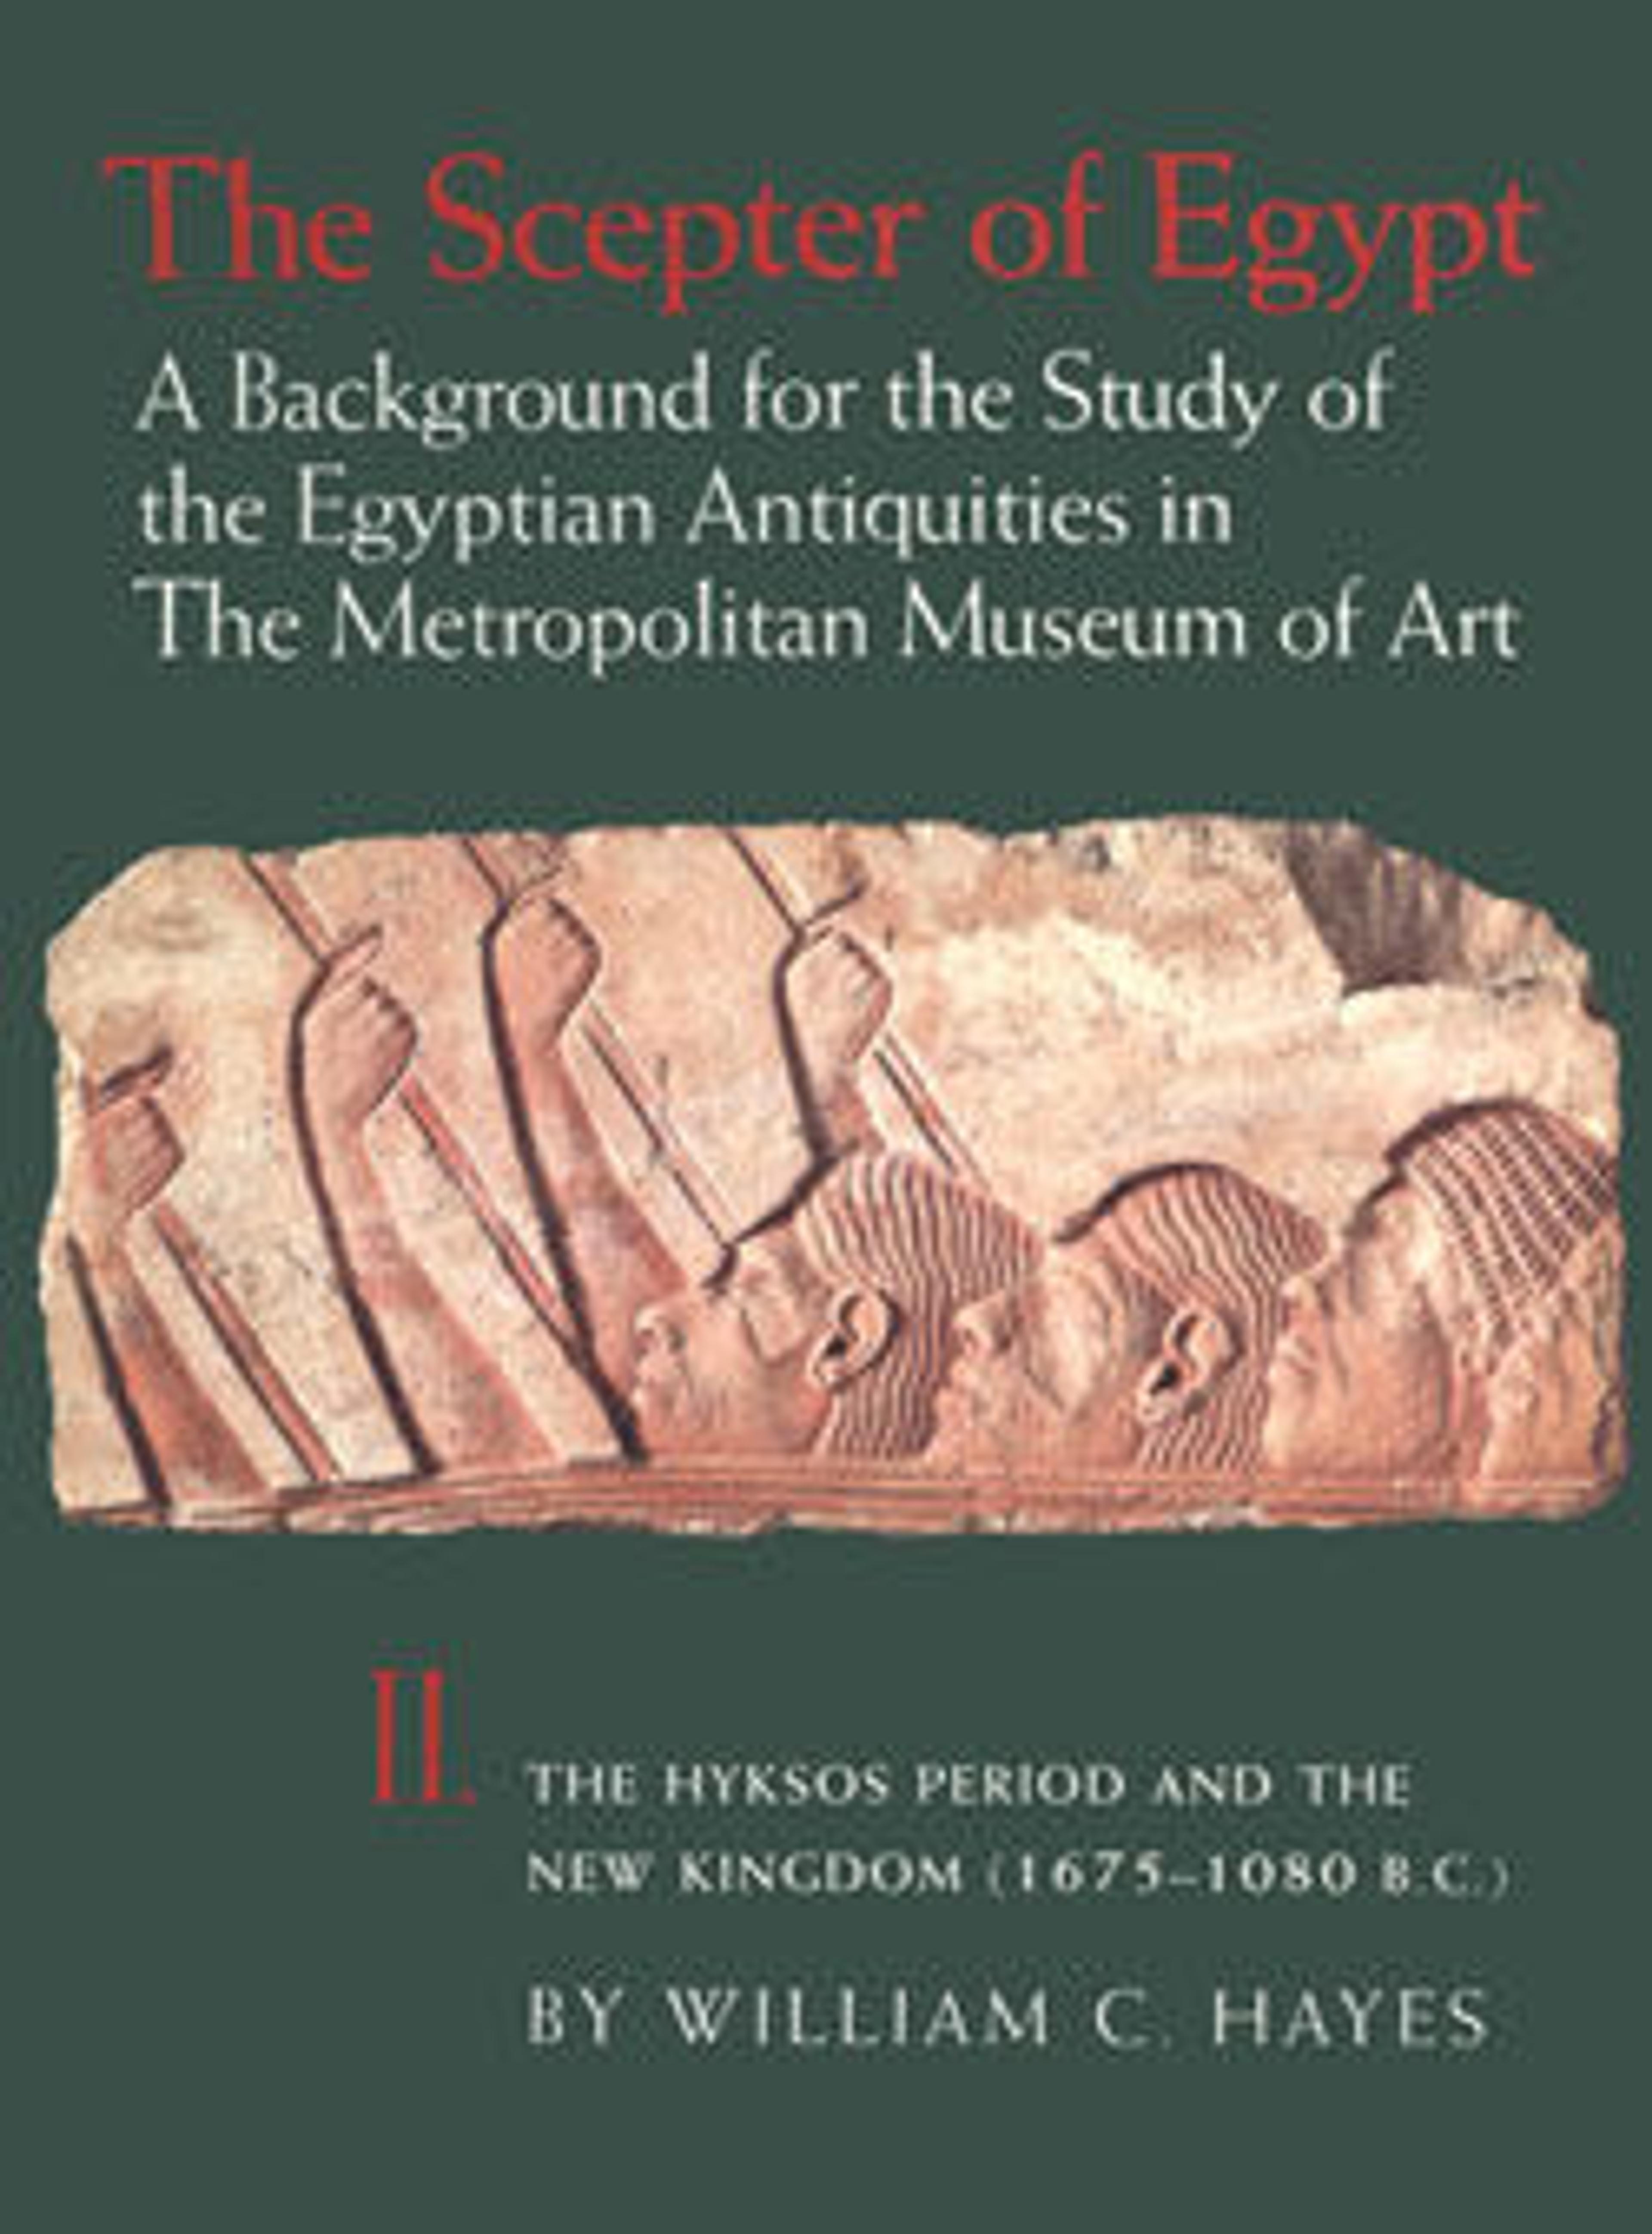 The Scepter of Egypt: A Background for the Study of the Egyptian Antiquities in The Metropolitan Museum of Art. Vol. 2, The Hyksos Period and the New Kingdom (1675-1080 B.C.)